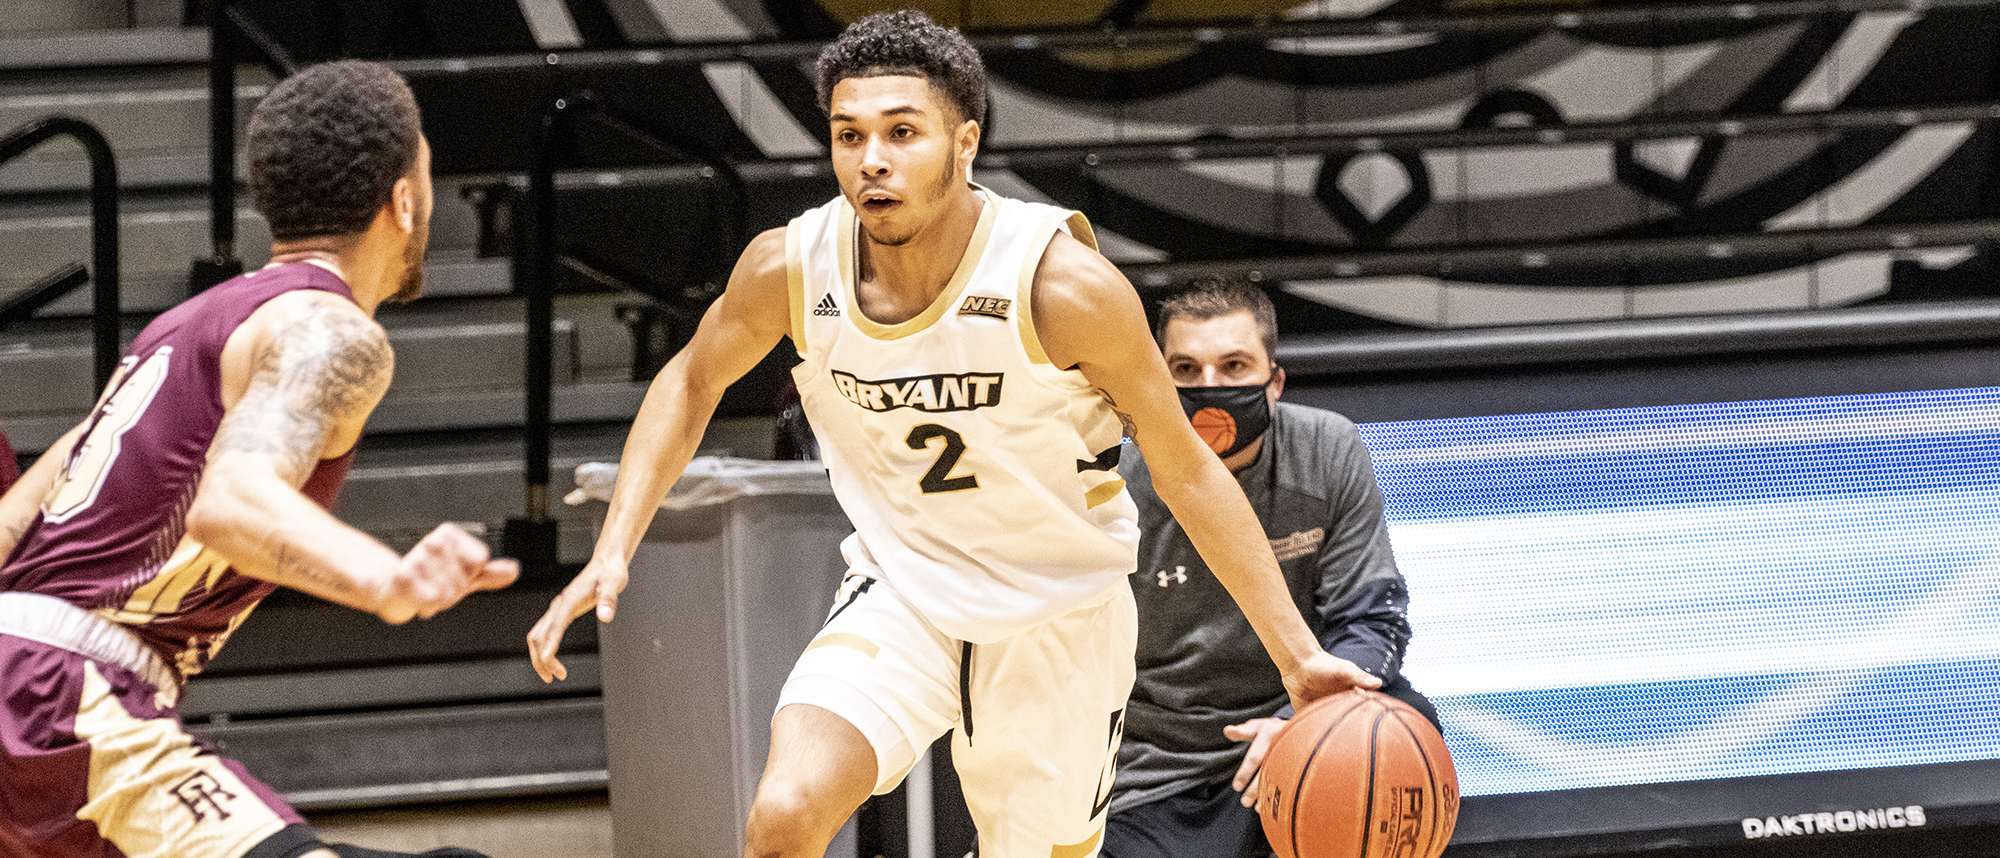 Bryant scores record 138 points in win over RIC